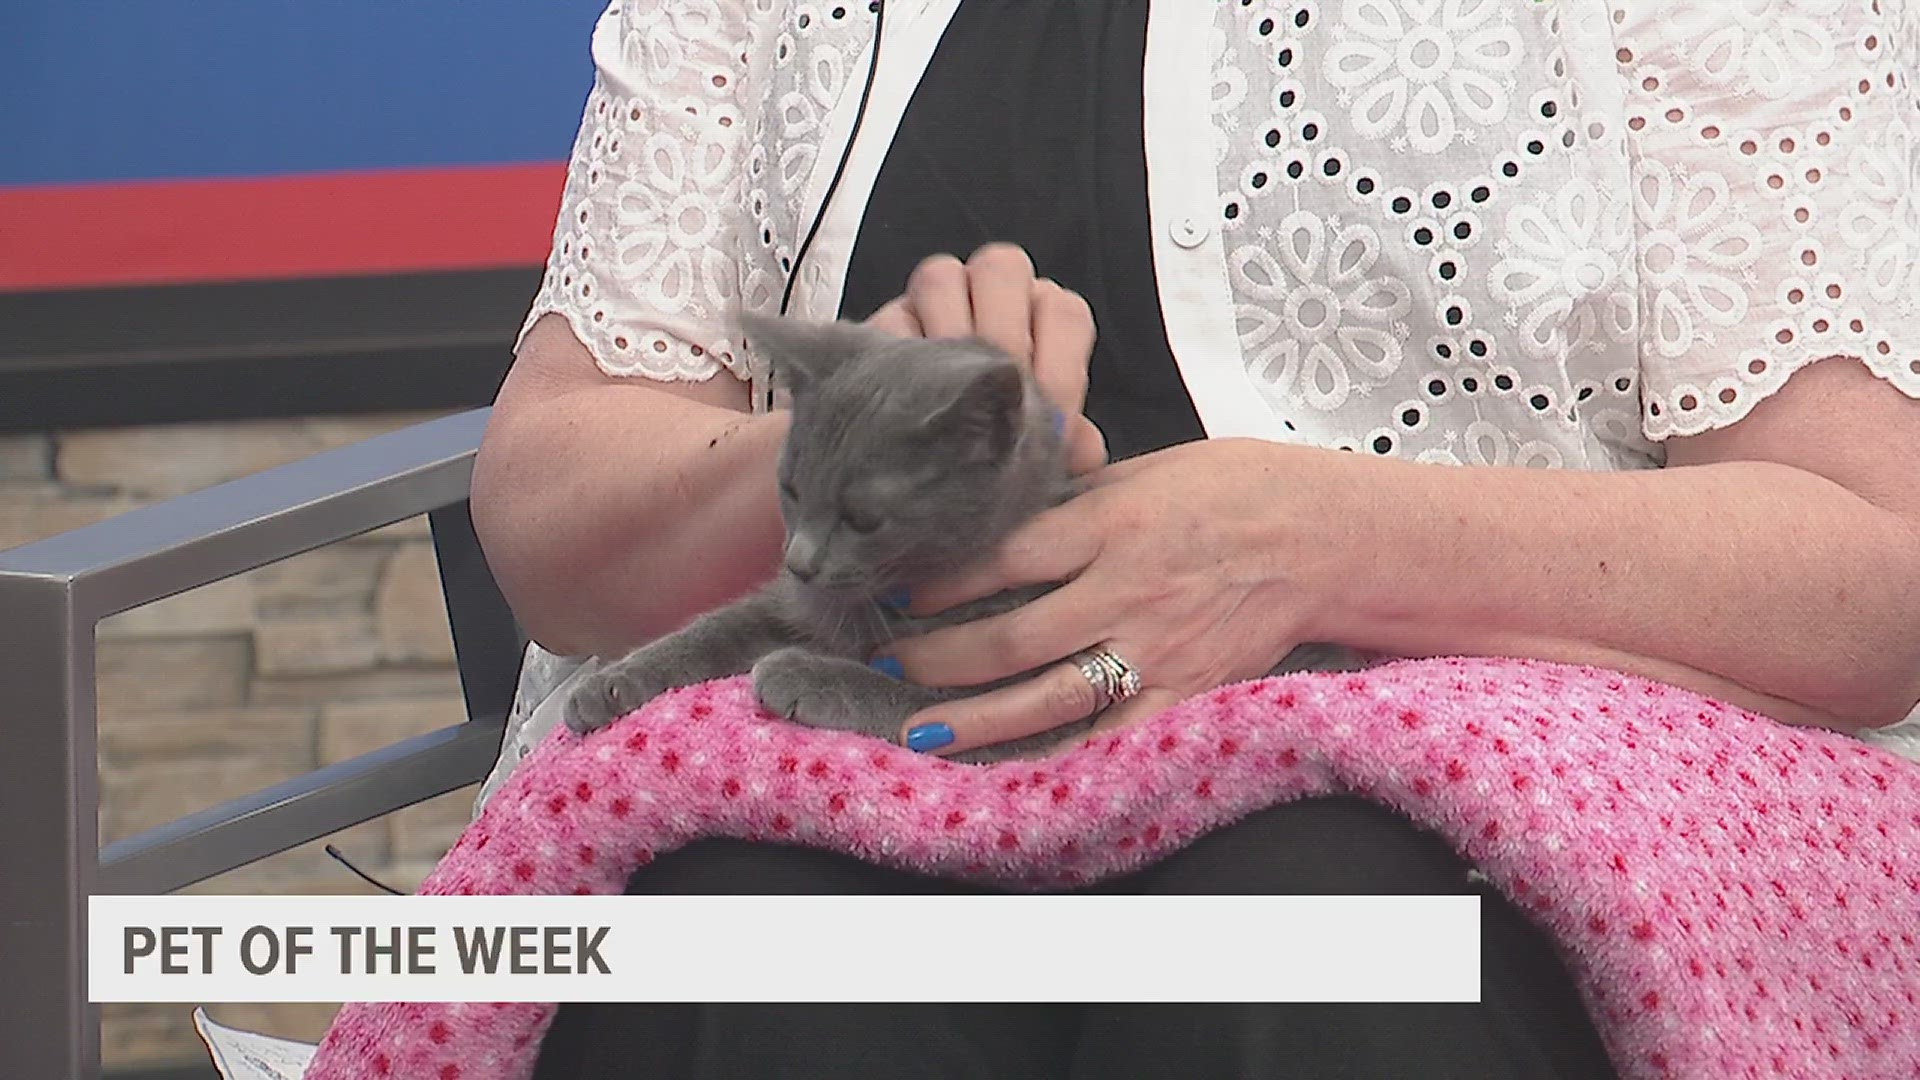 Briar is a 3-month-old neutered male who tested positive for Feline Leukemia, but may grow out of it. Check him out at the Quad Cities Animal Welfare Center today!